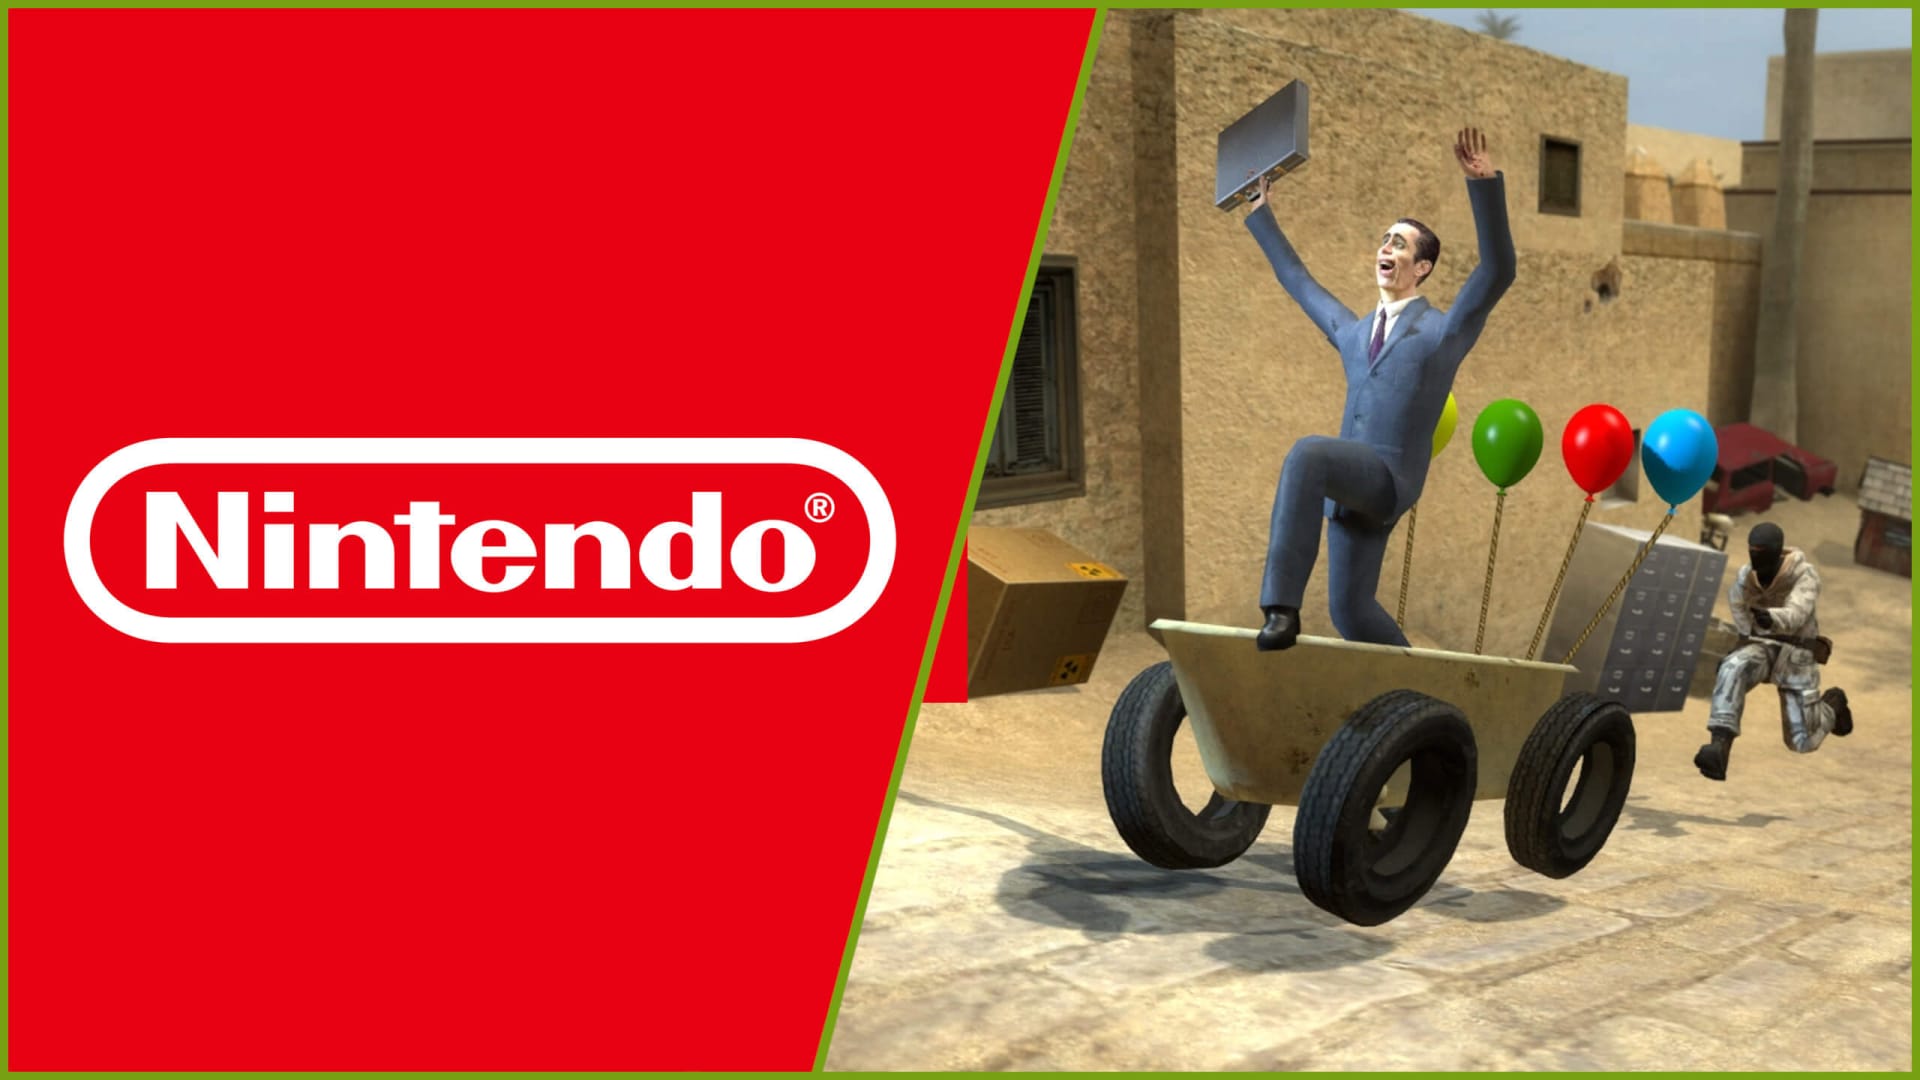 The Nintendo logo next to a shot of the G-Man and a soldier in Garry's Mod